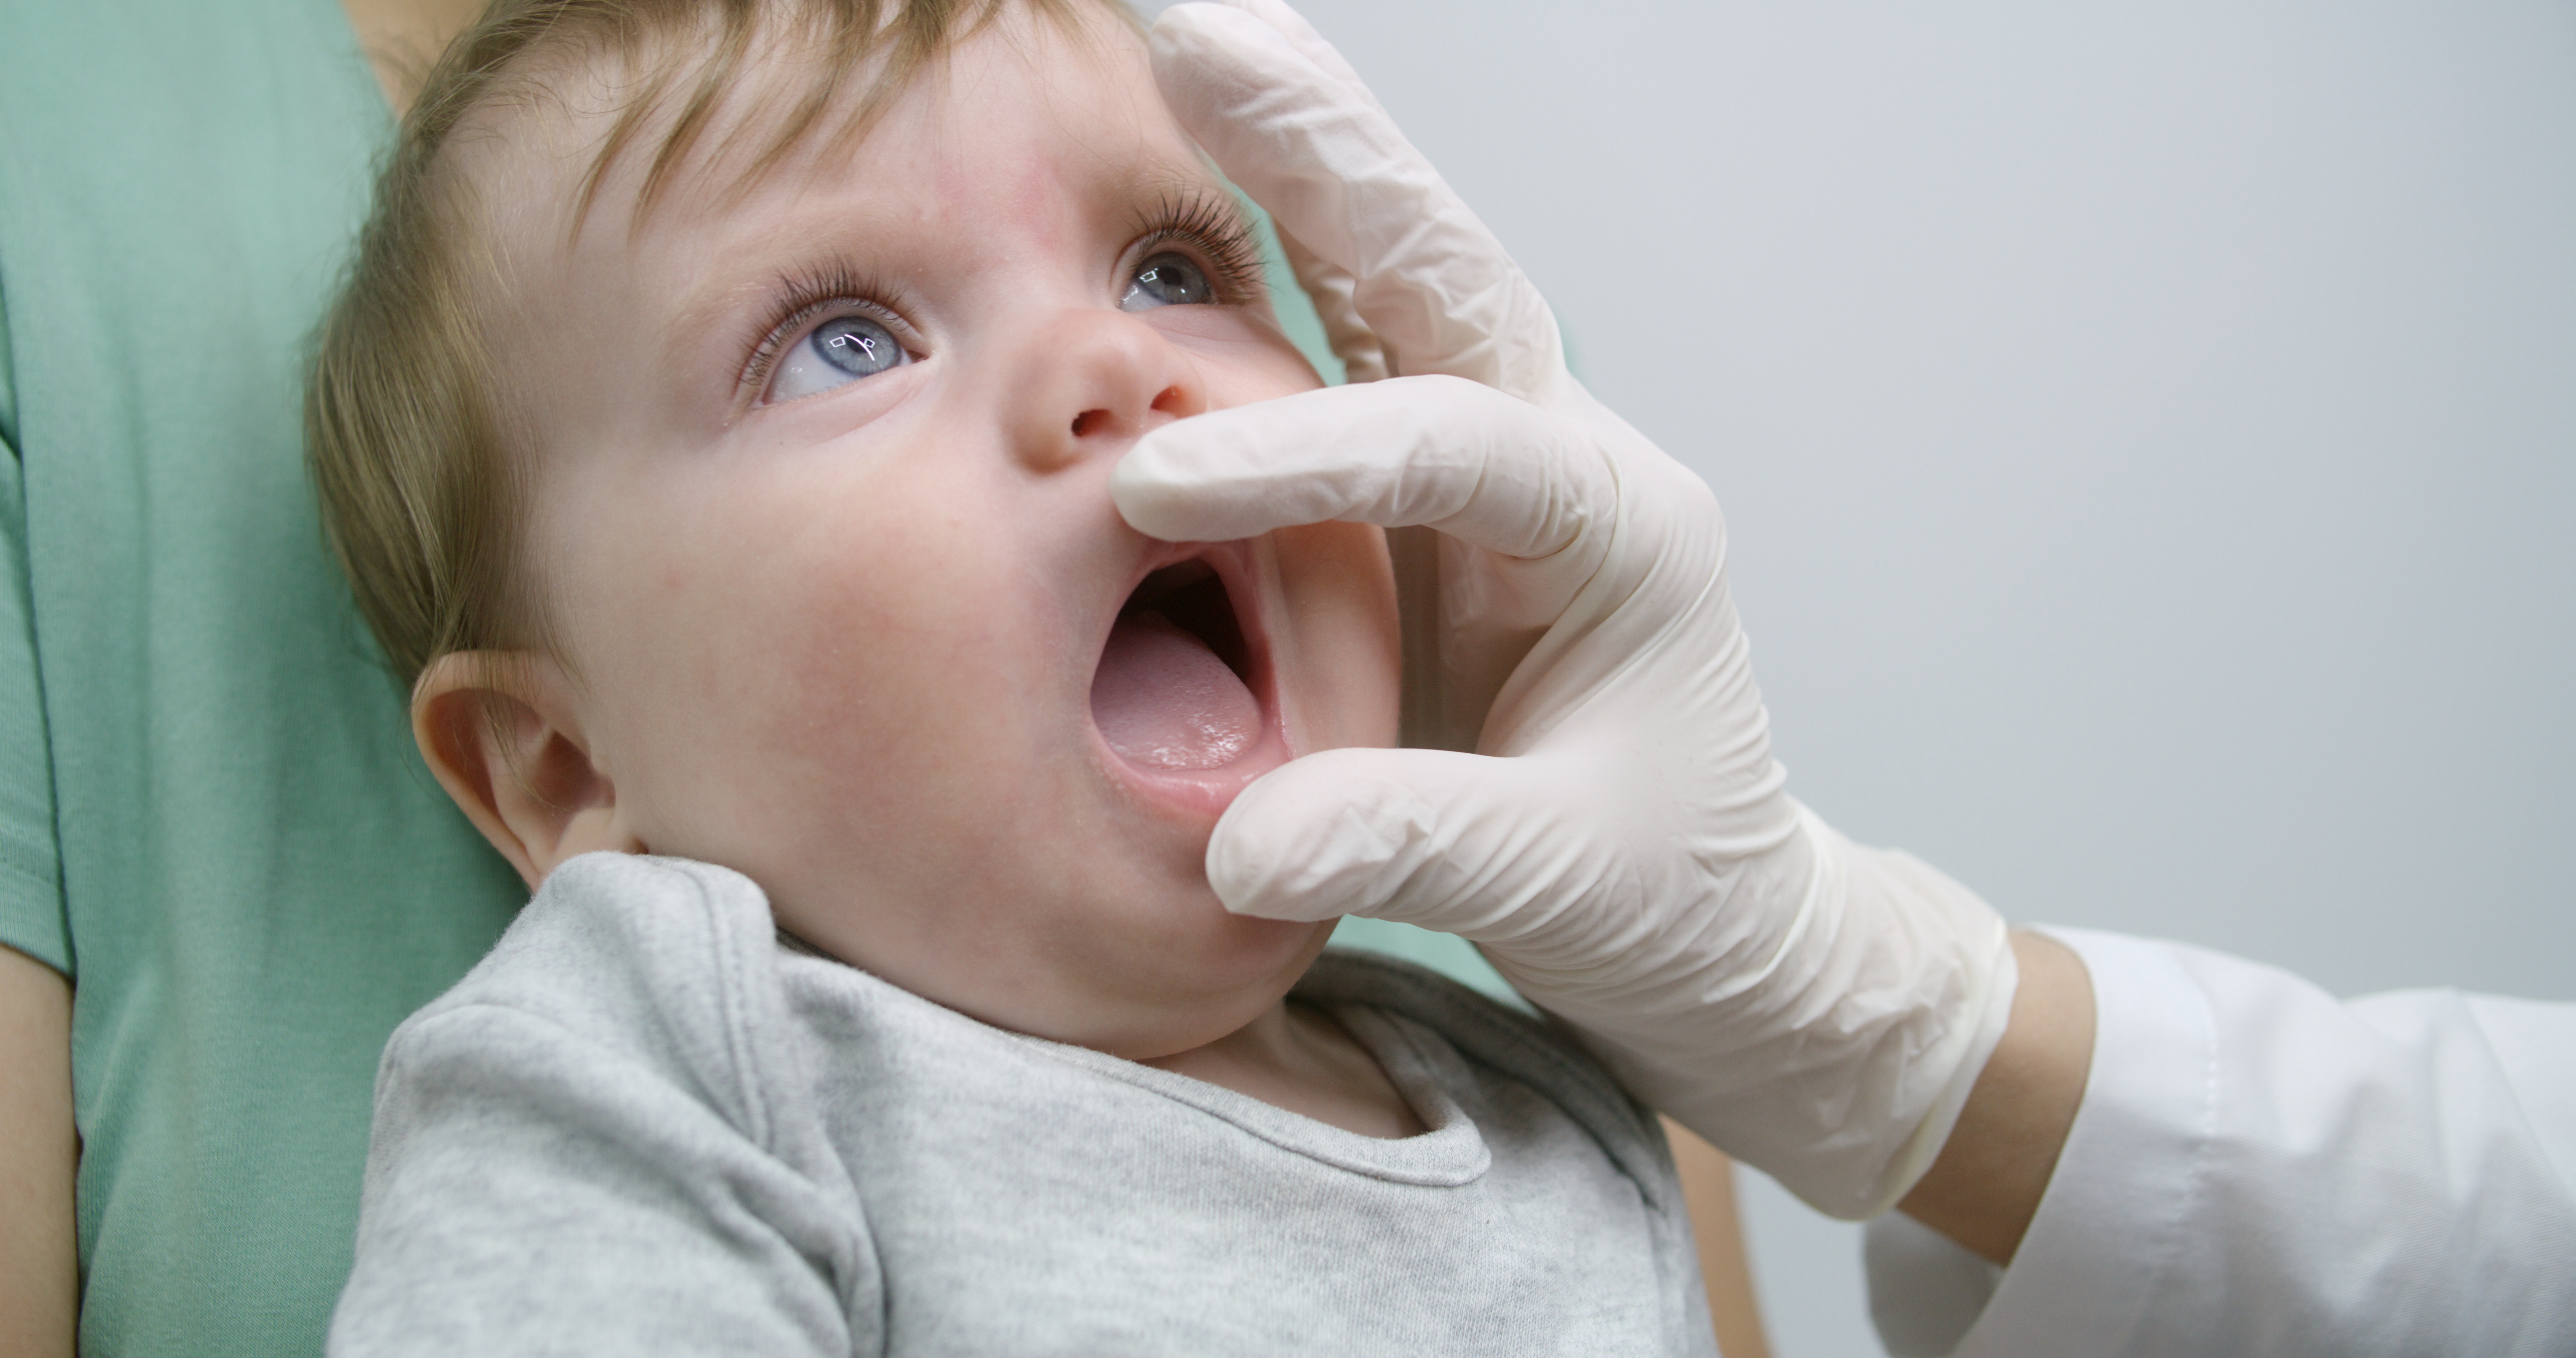 When Should You Start Taking Your Child to the Dentist? A Guide for Parents